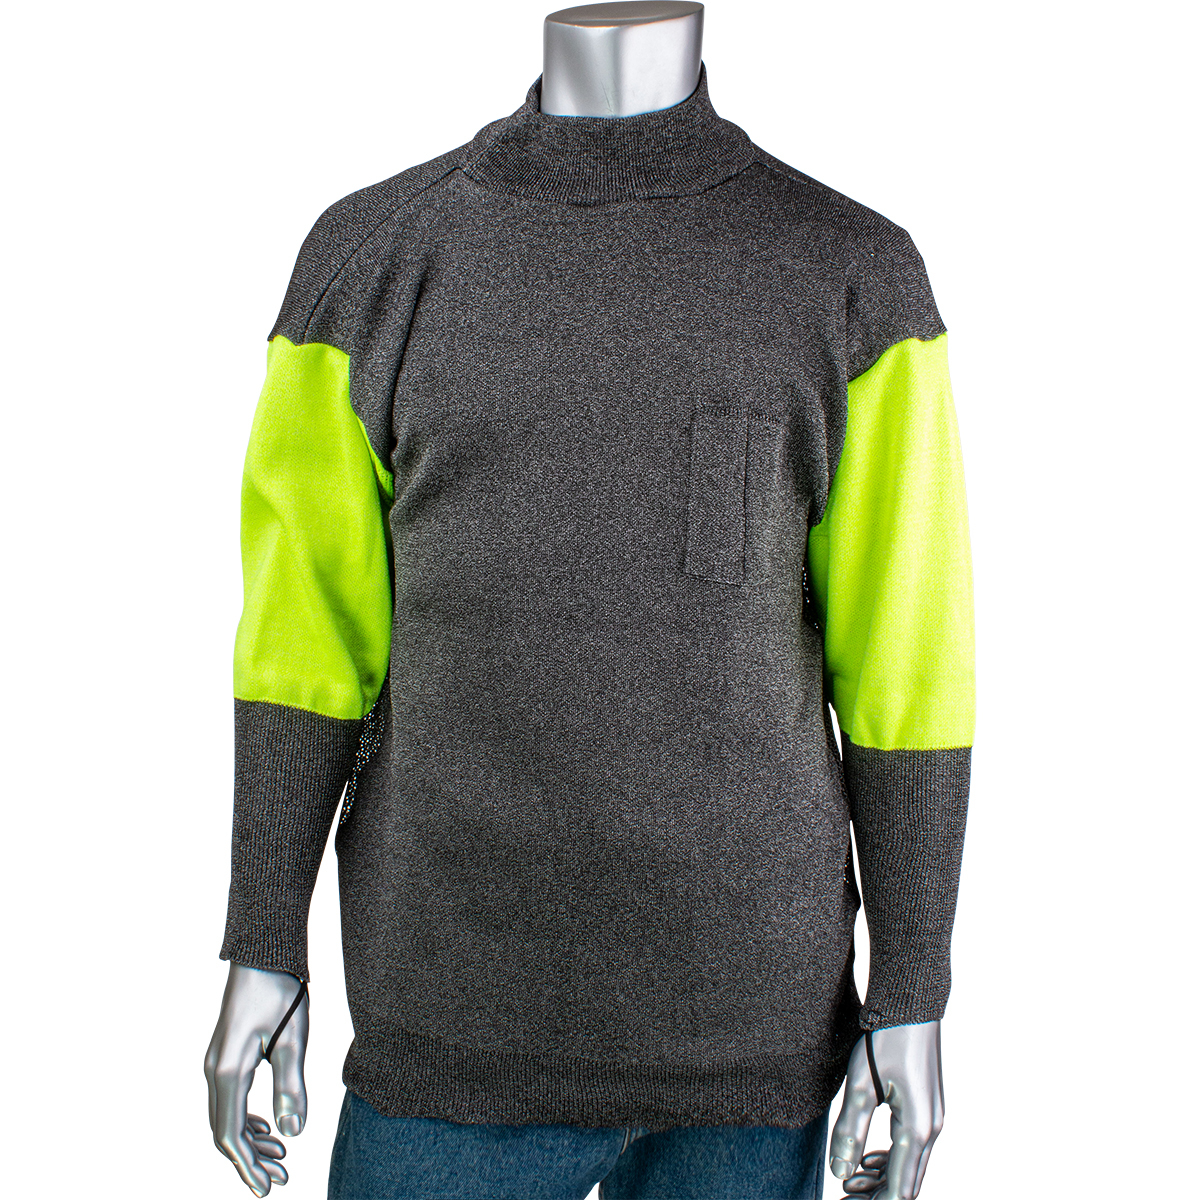 P190SP3CMHVBUV-PP1TL  PIP® Kut Gard® ATA® PreventWear™ Cut Protection Pullovers w/ Hi-Vis Sleeves, 3-in Comfort Collar and 3/4 Mesh Back